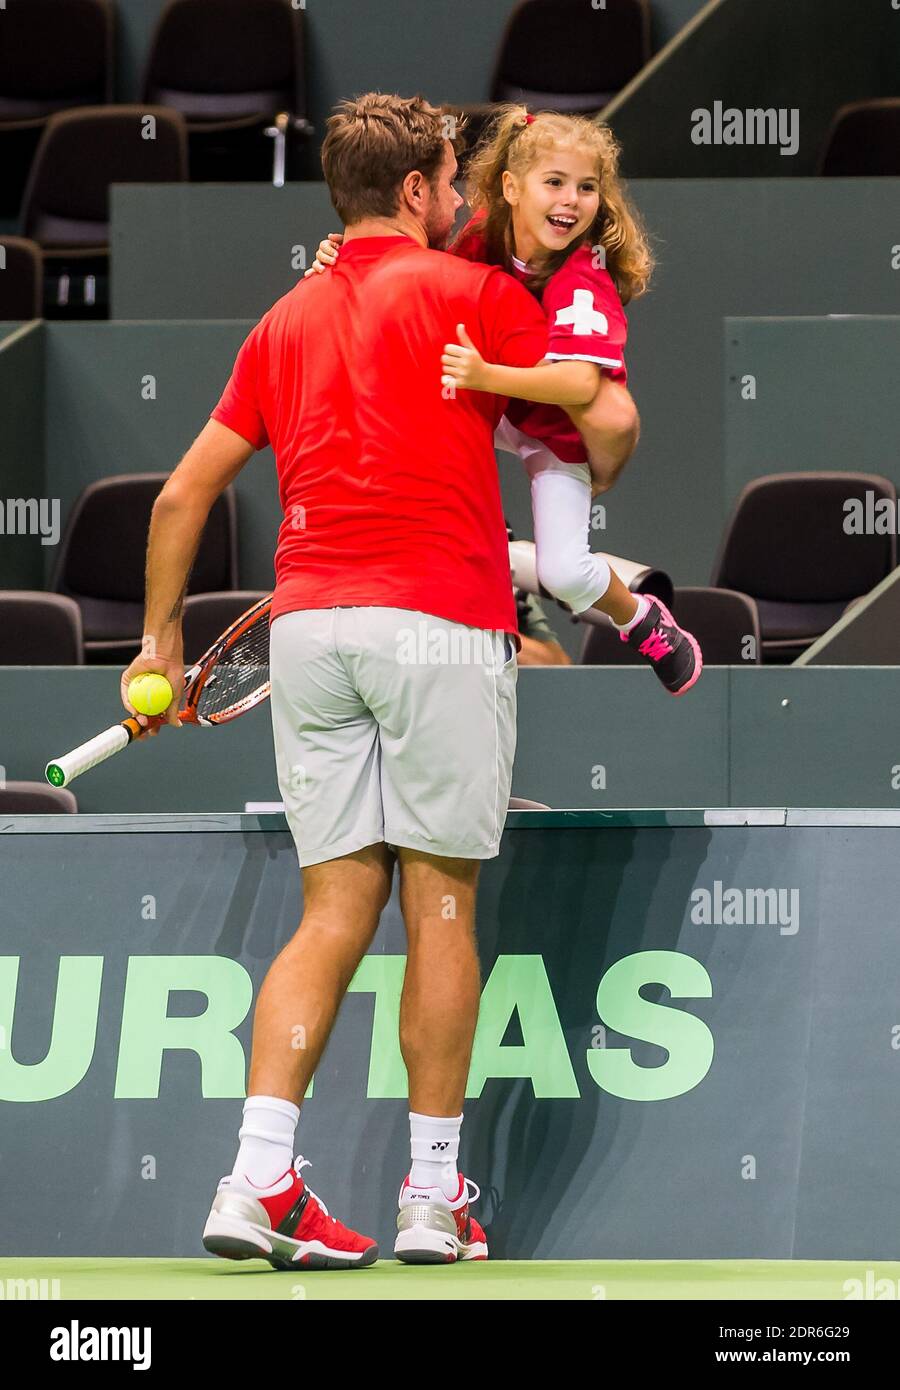 Stanislas 'Stan' Wawrinka during his training session with his daughter  Alexia Wawrinka before the Davis Cup World Group playoff tennis tie match  between Switzerland and the Netherlands in Geneva, Switzerland on September